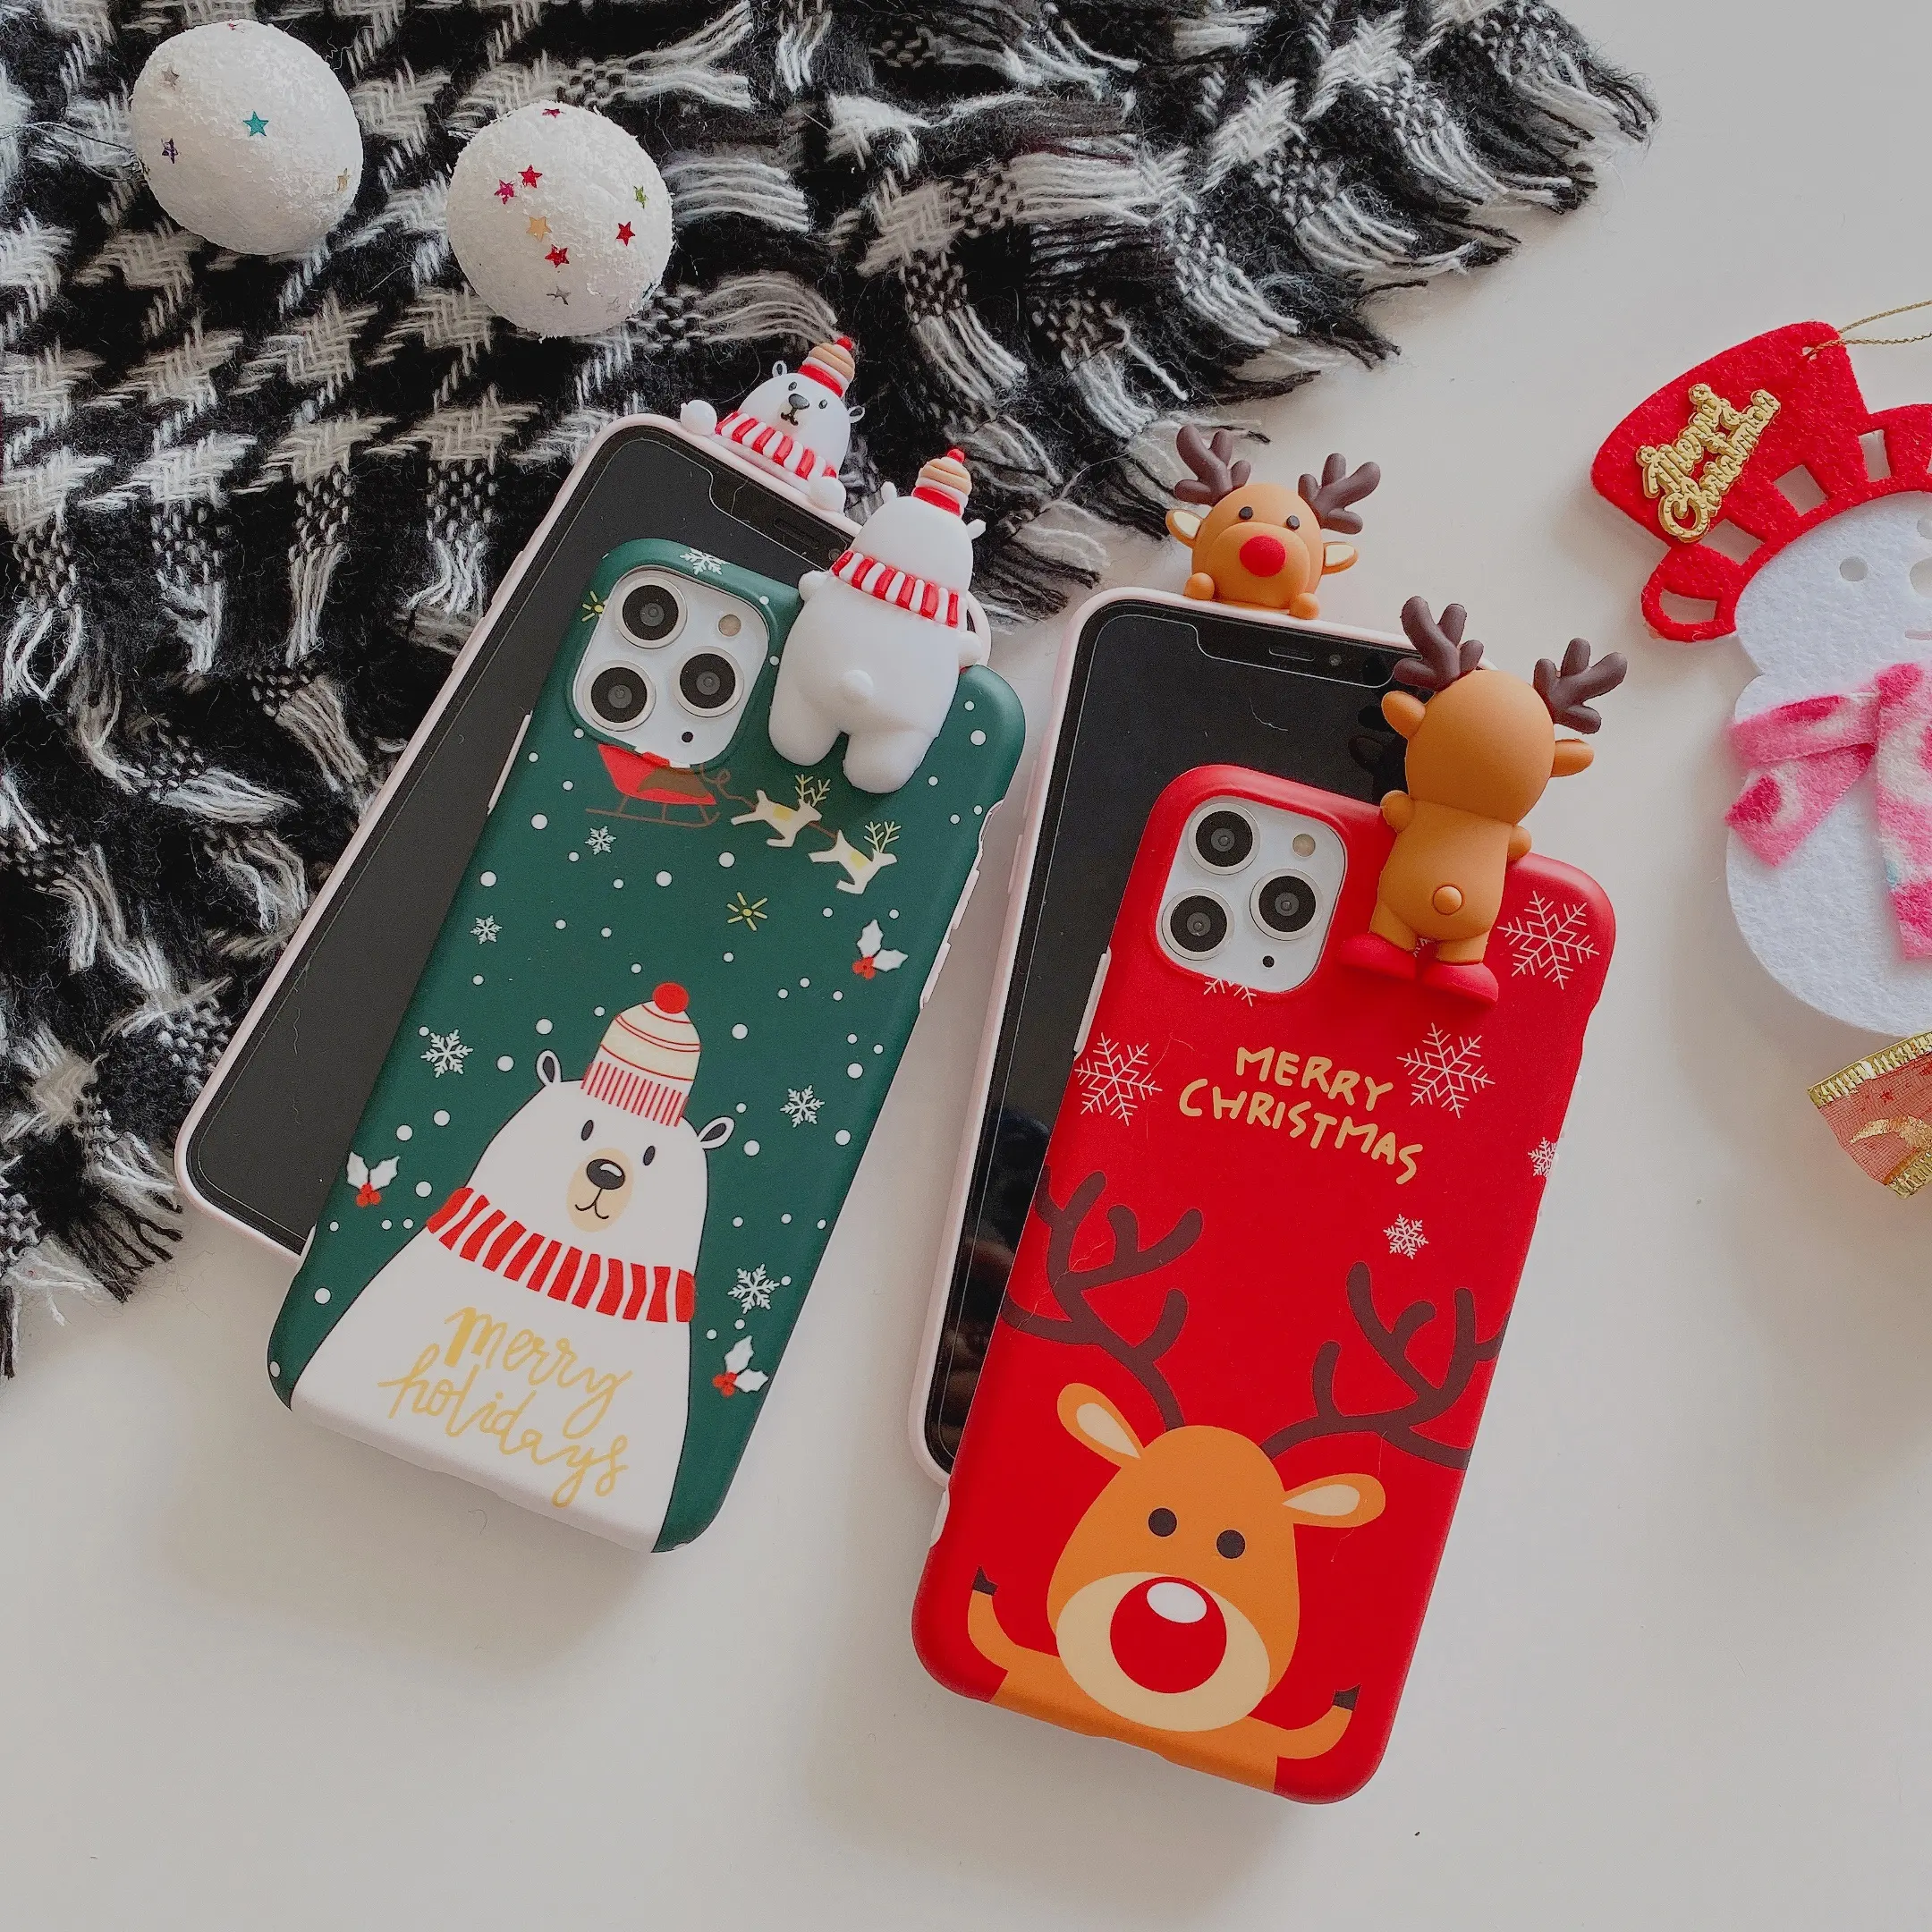 2022 New Christmas Gift iPhone Case Cute 3D Bear Soft TPU Phone case for iPhone 13 12 pro max 11 iPhone XS XR XS Max